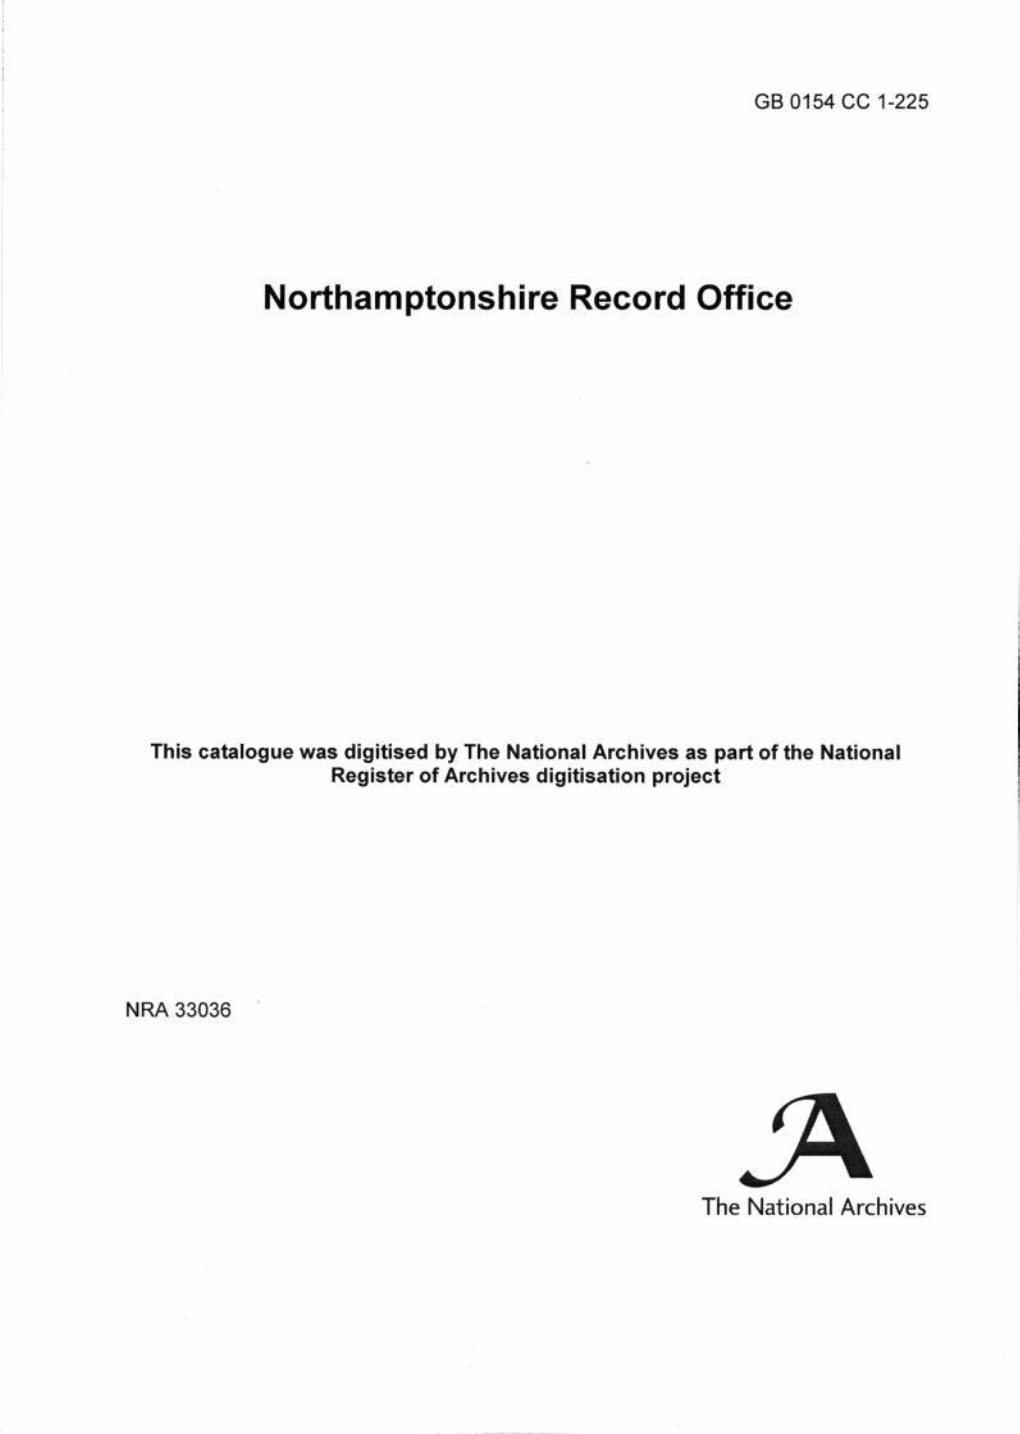 Northamptonshire Record Office